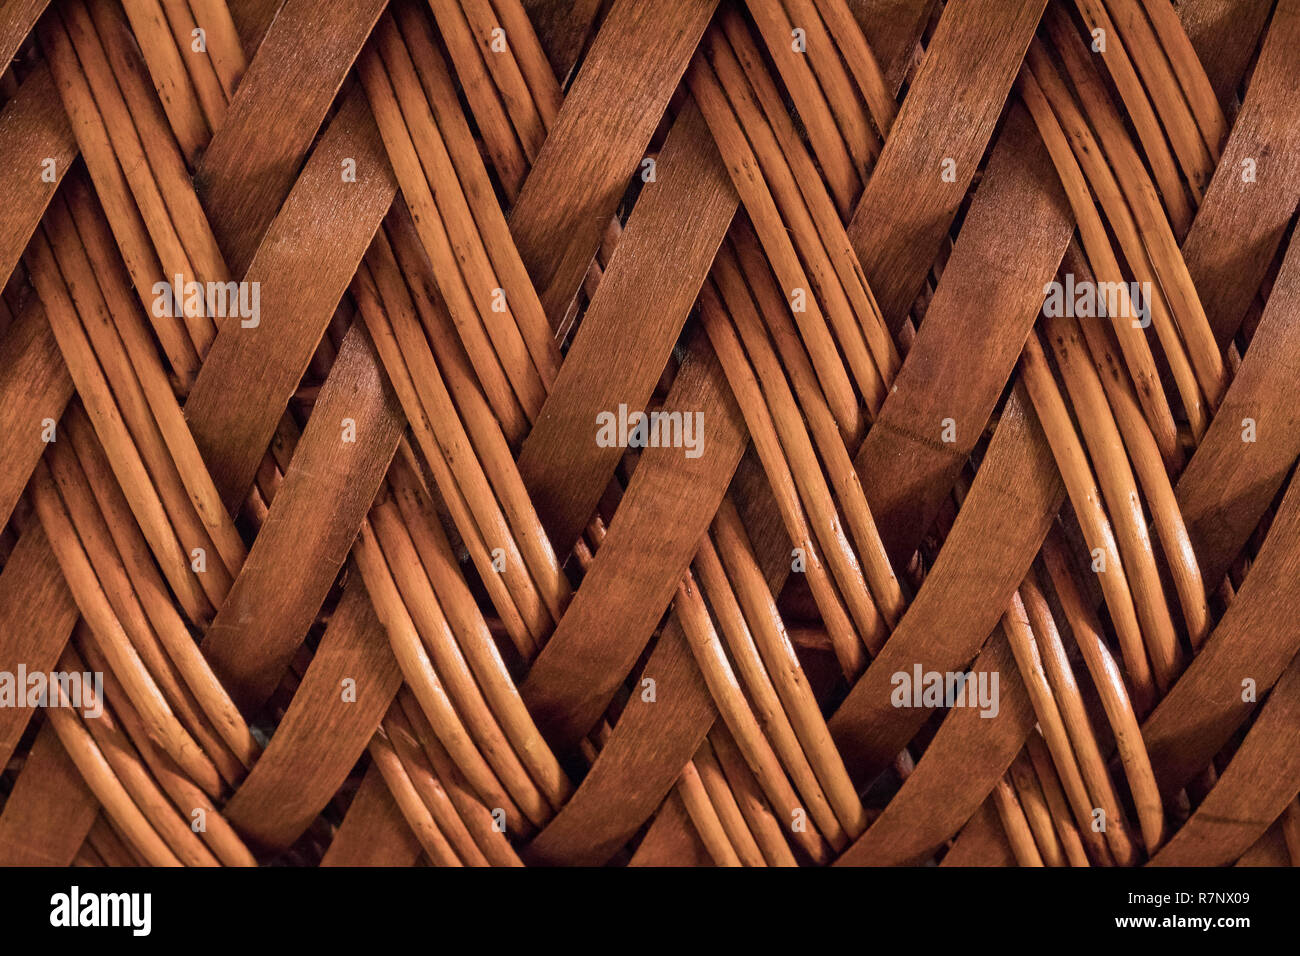 wicker or rattan basket texture. High resolution seamless texture. tree color. Stock Photo